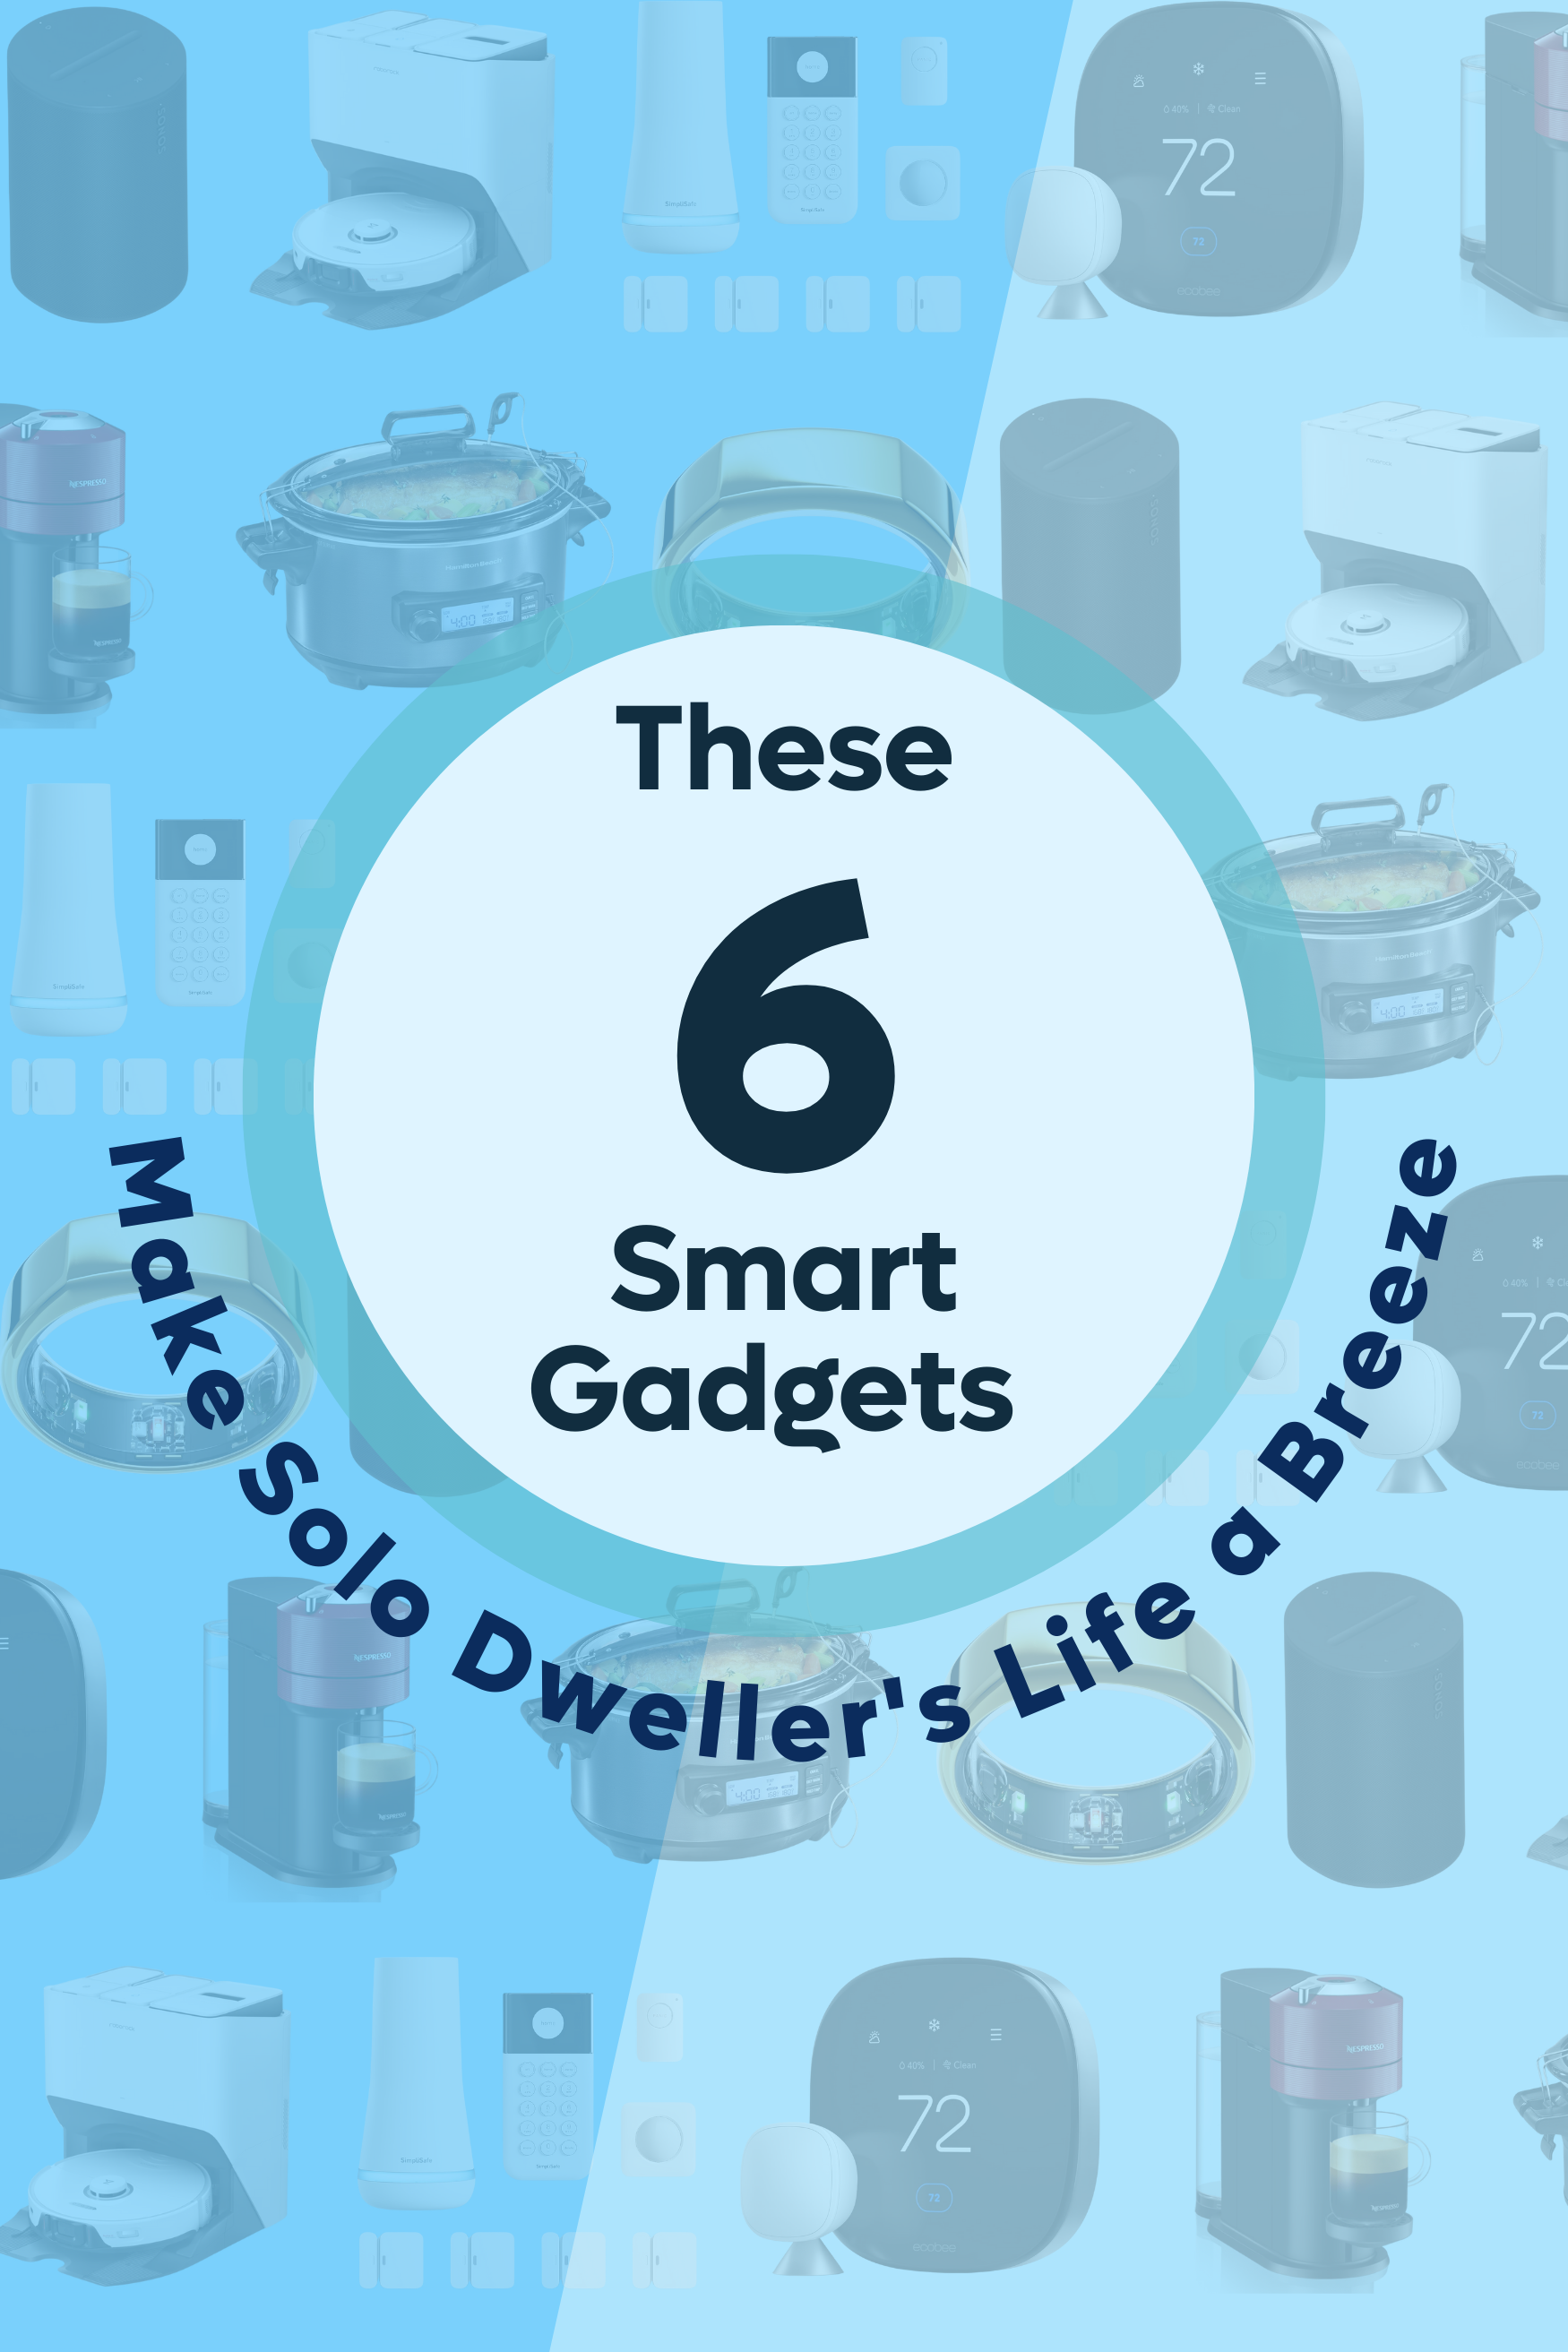 These Smart Gadgets Make Solo Dweller's Life a Breeze